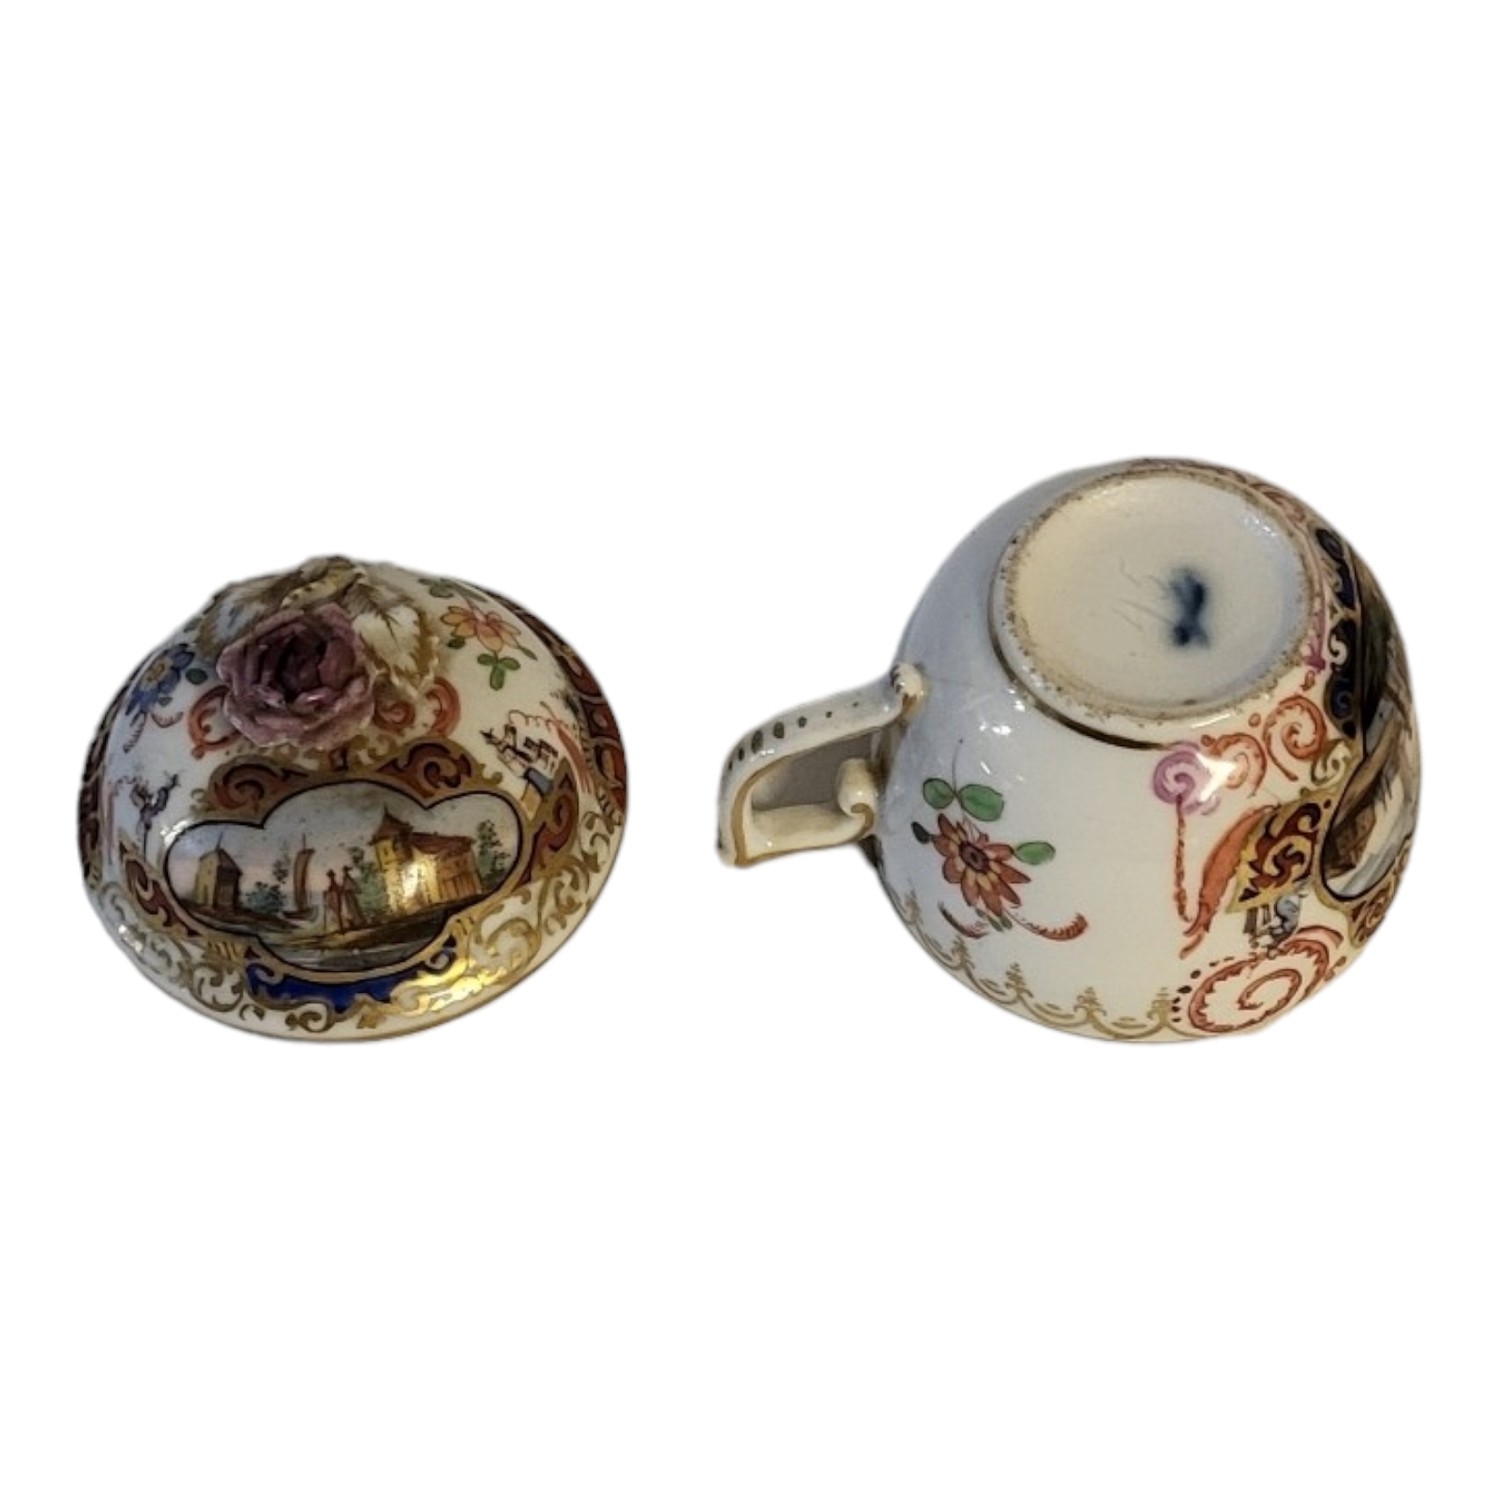 MEISSEN, AN 18TH CENTURY MINIATURE HARD PASTE PORCELAIN CUSTARD CUP AND COVER Designed after - Image 7 of 9